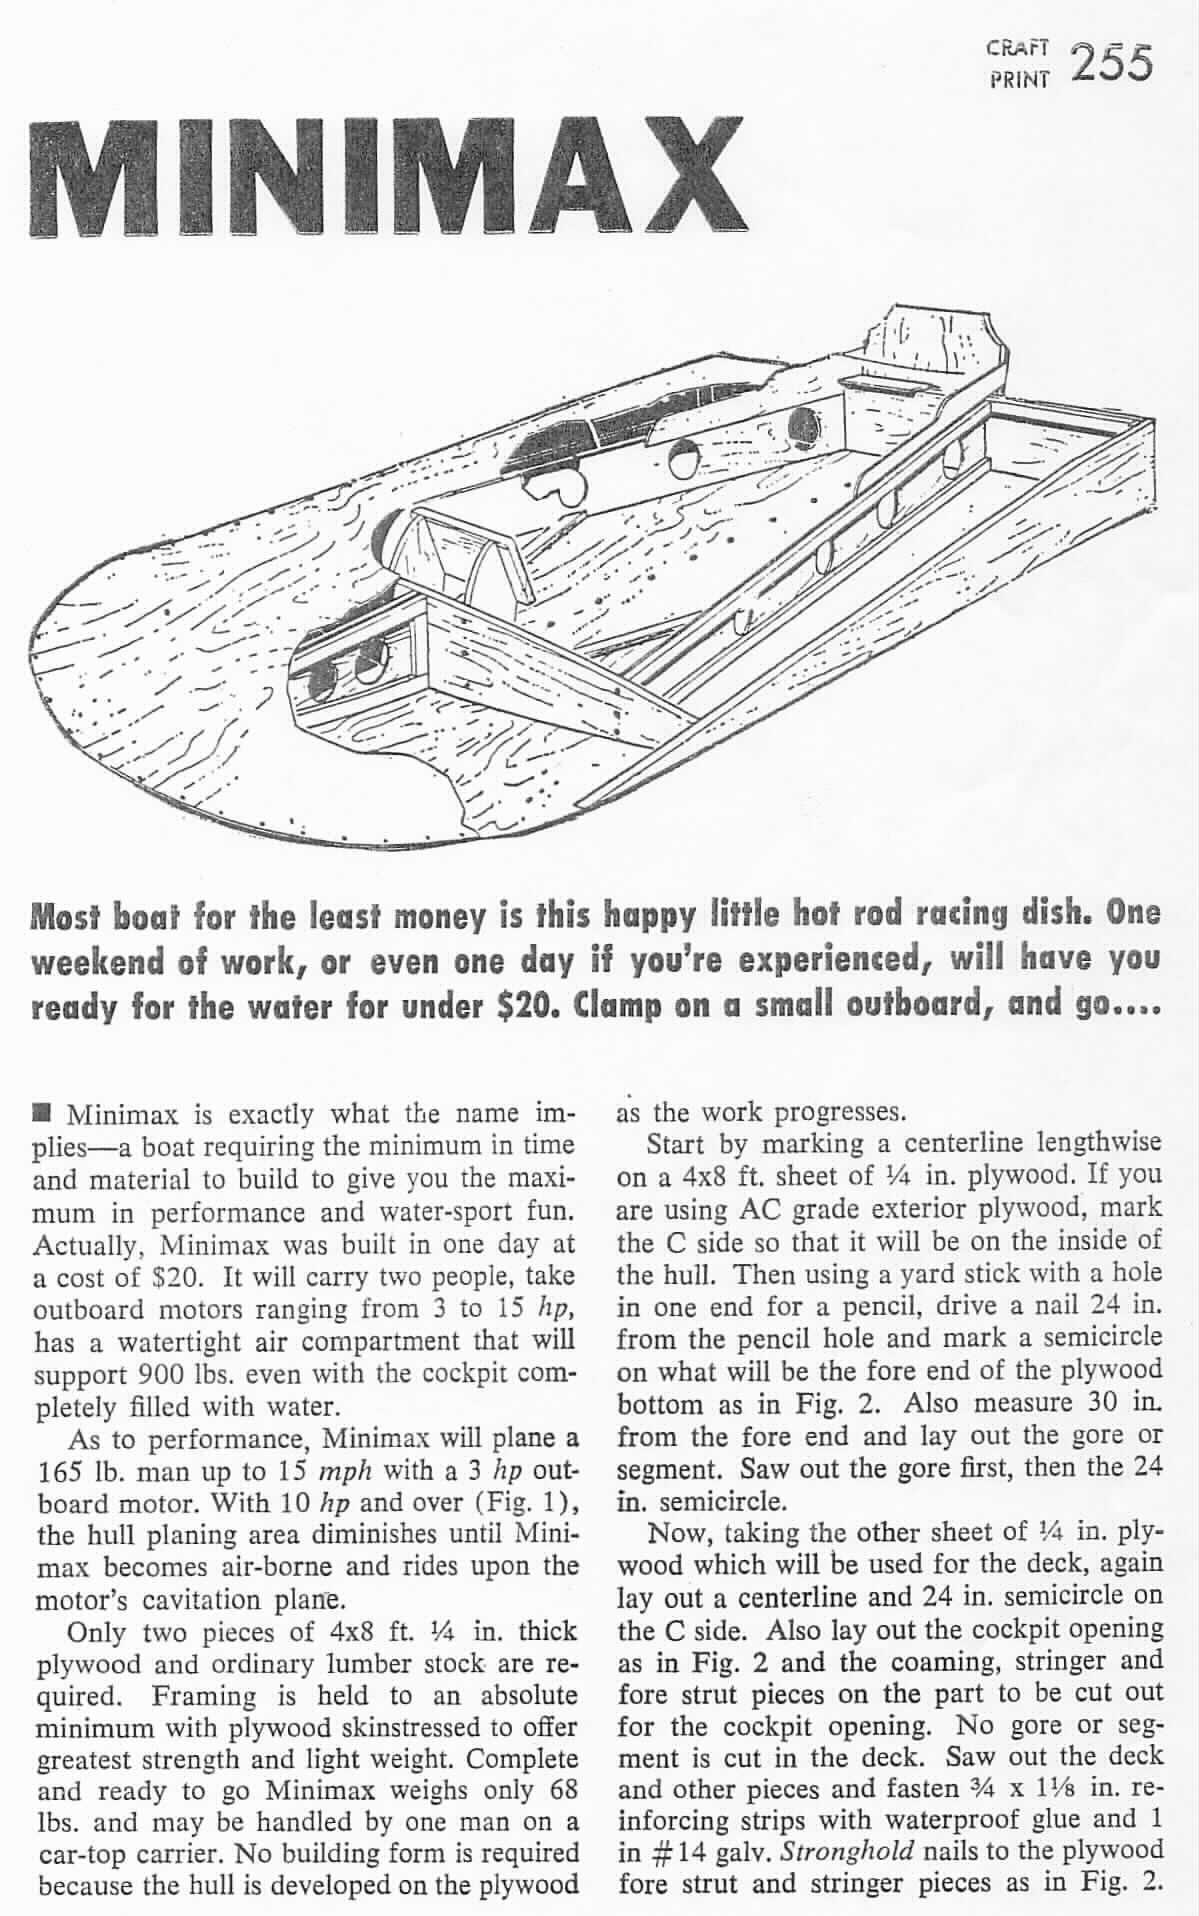 www.svensons.com - Free Boat Plans From "Science and Mechanics 